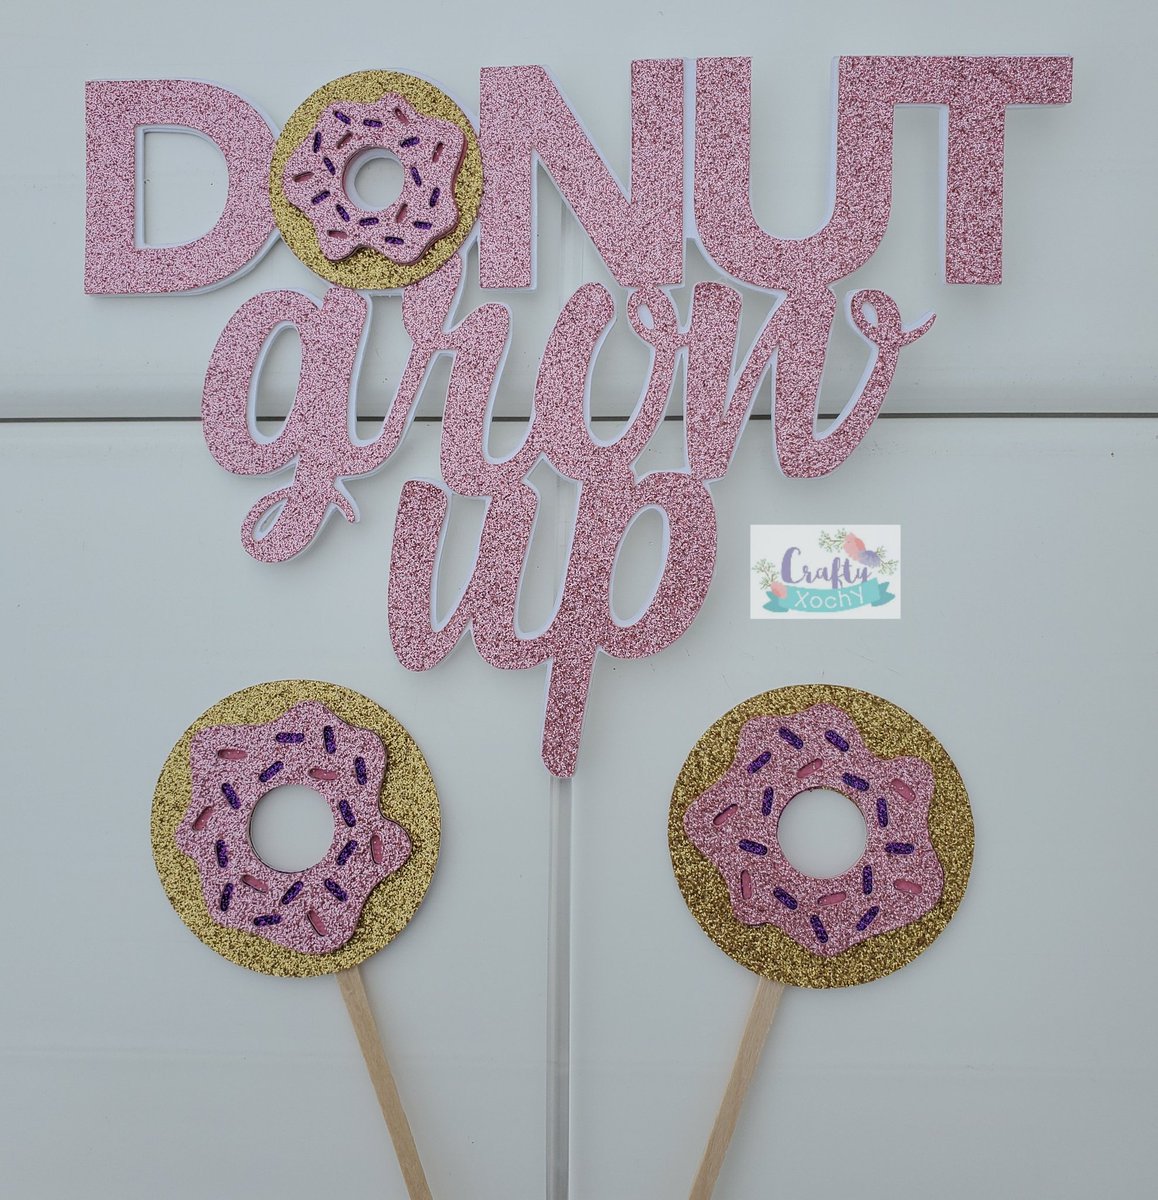 'D🍩nut grow up' cake topper with layered donut and matching cupcake toppers.
#craftyxochy #lovetocraft #cricutmade #CricutExploreAir #caketopper #birthdaytopper #donut #donutgrowup #birthdaygirl #glittertopper #happybirthday